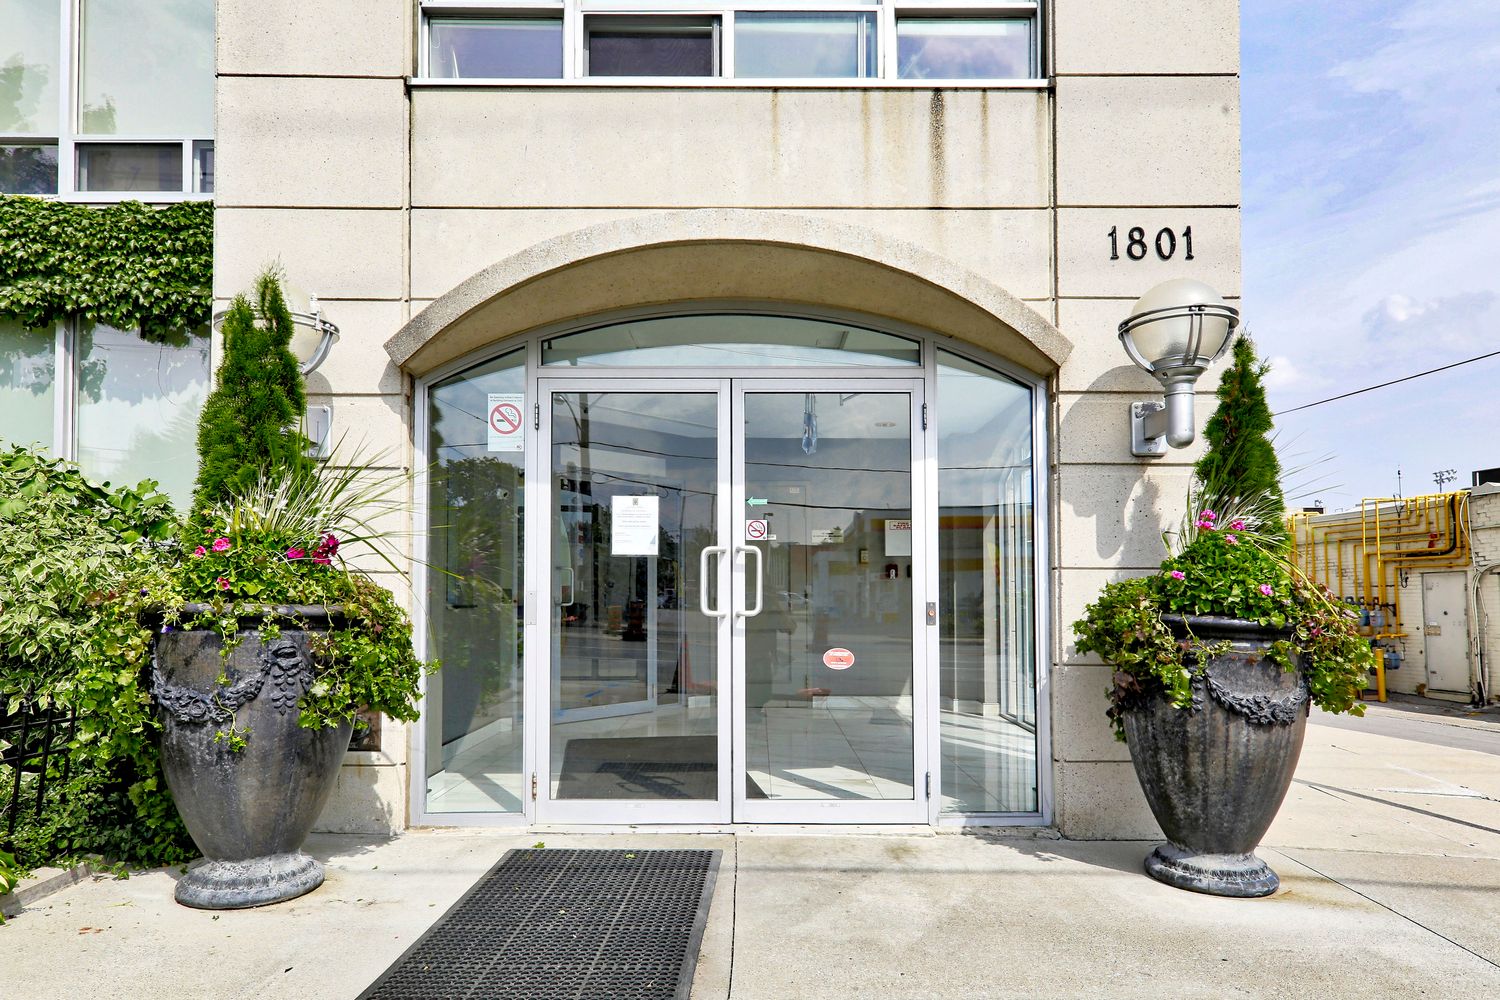 1801 Bayview Avenue. The Bayview is located in  East York, Toronto - image #4 of 4